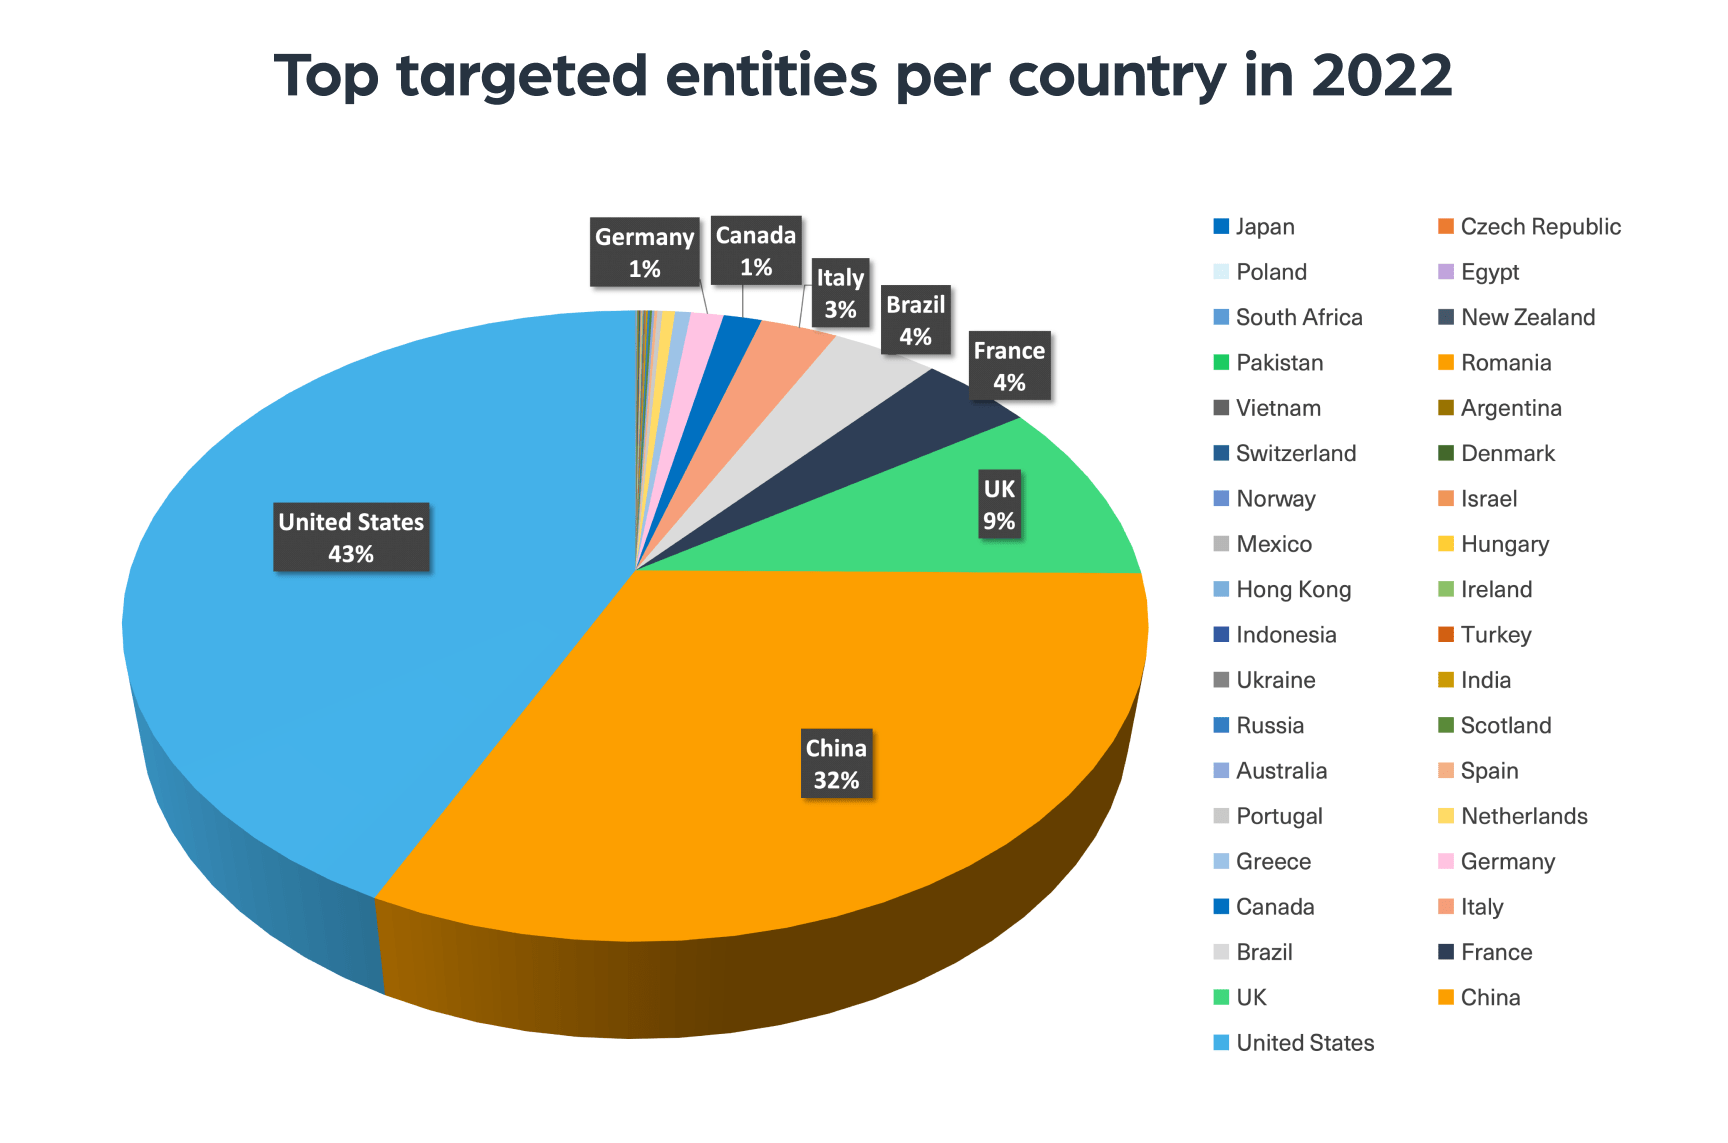 The top targeted entities per country in 2022